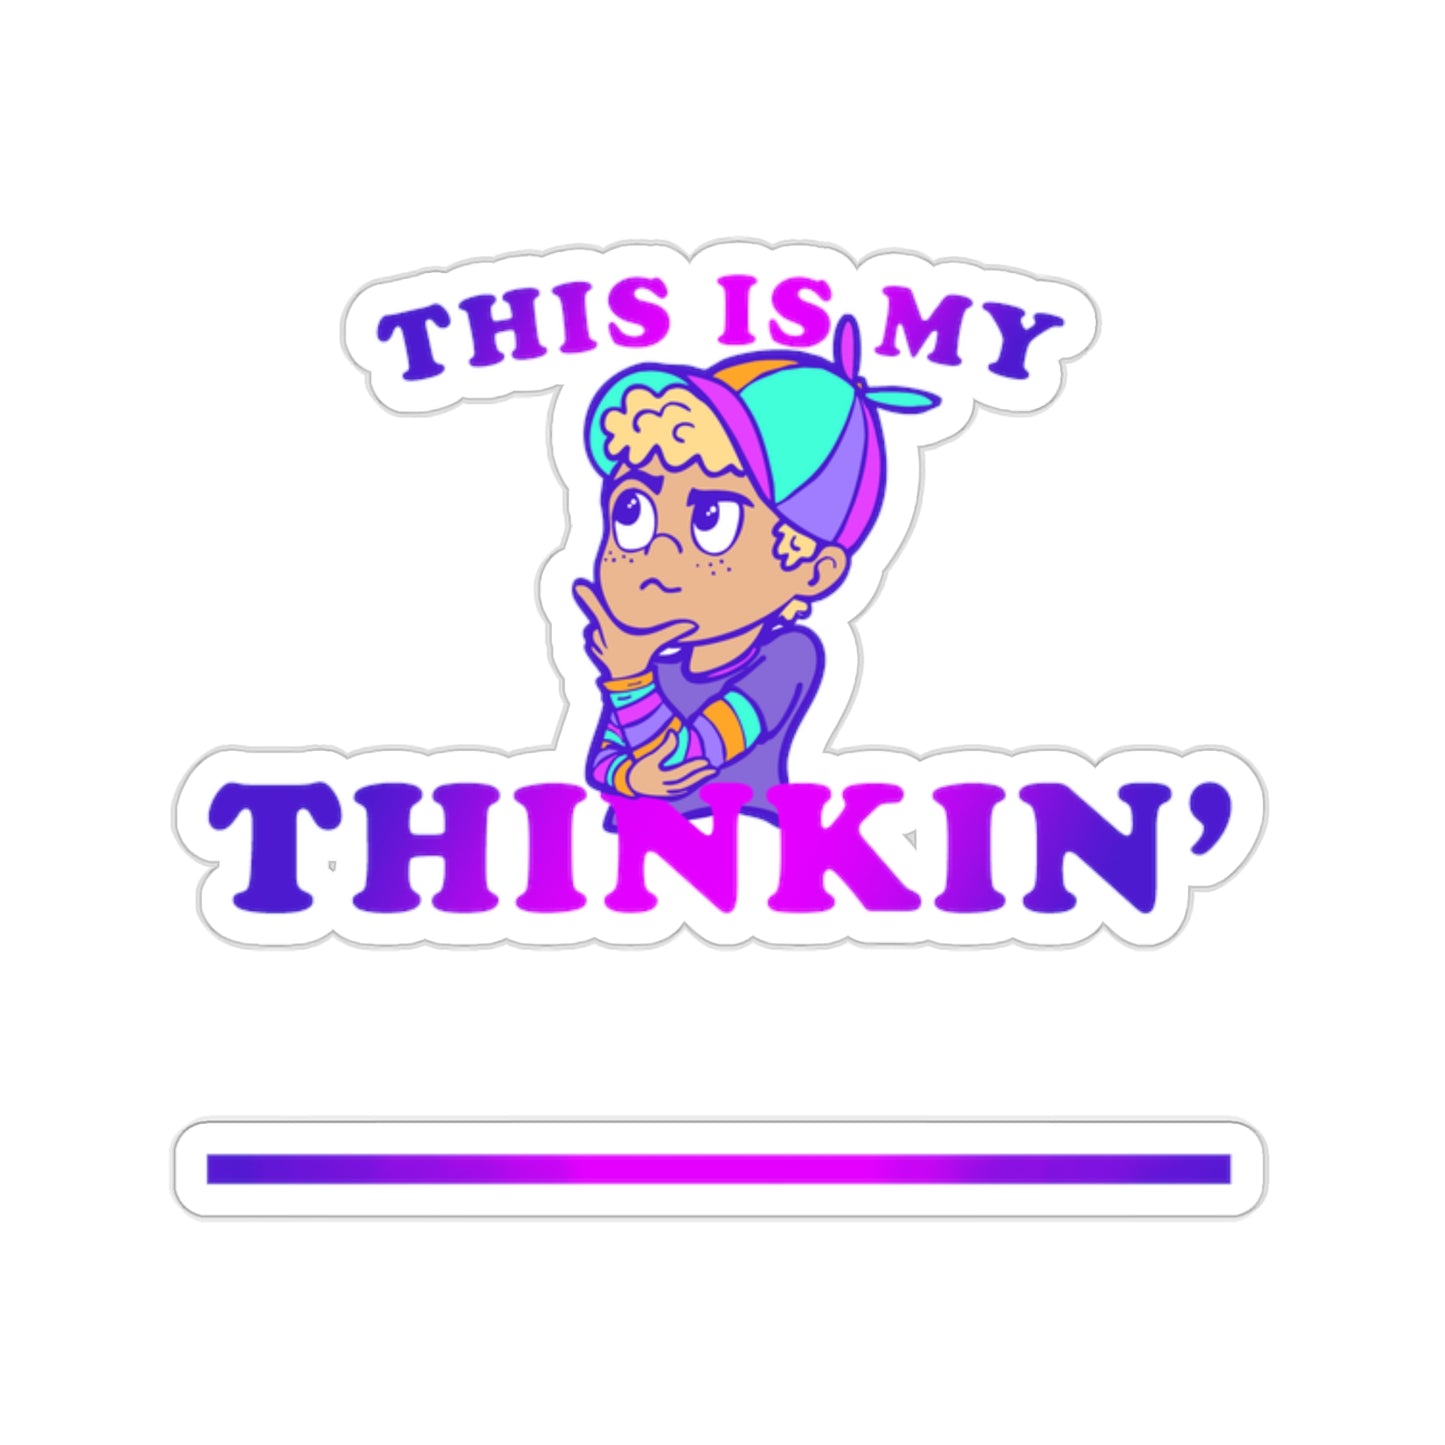 "This is My Thinkin' (fill in the blank)" - Transparent - Kiss-Cut Stickers